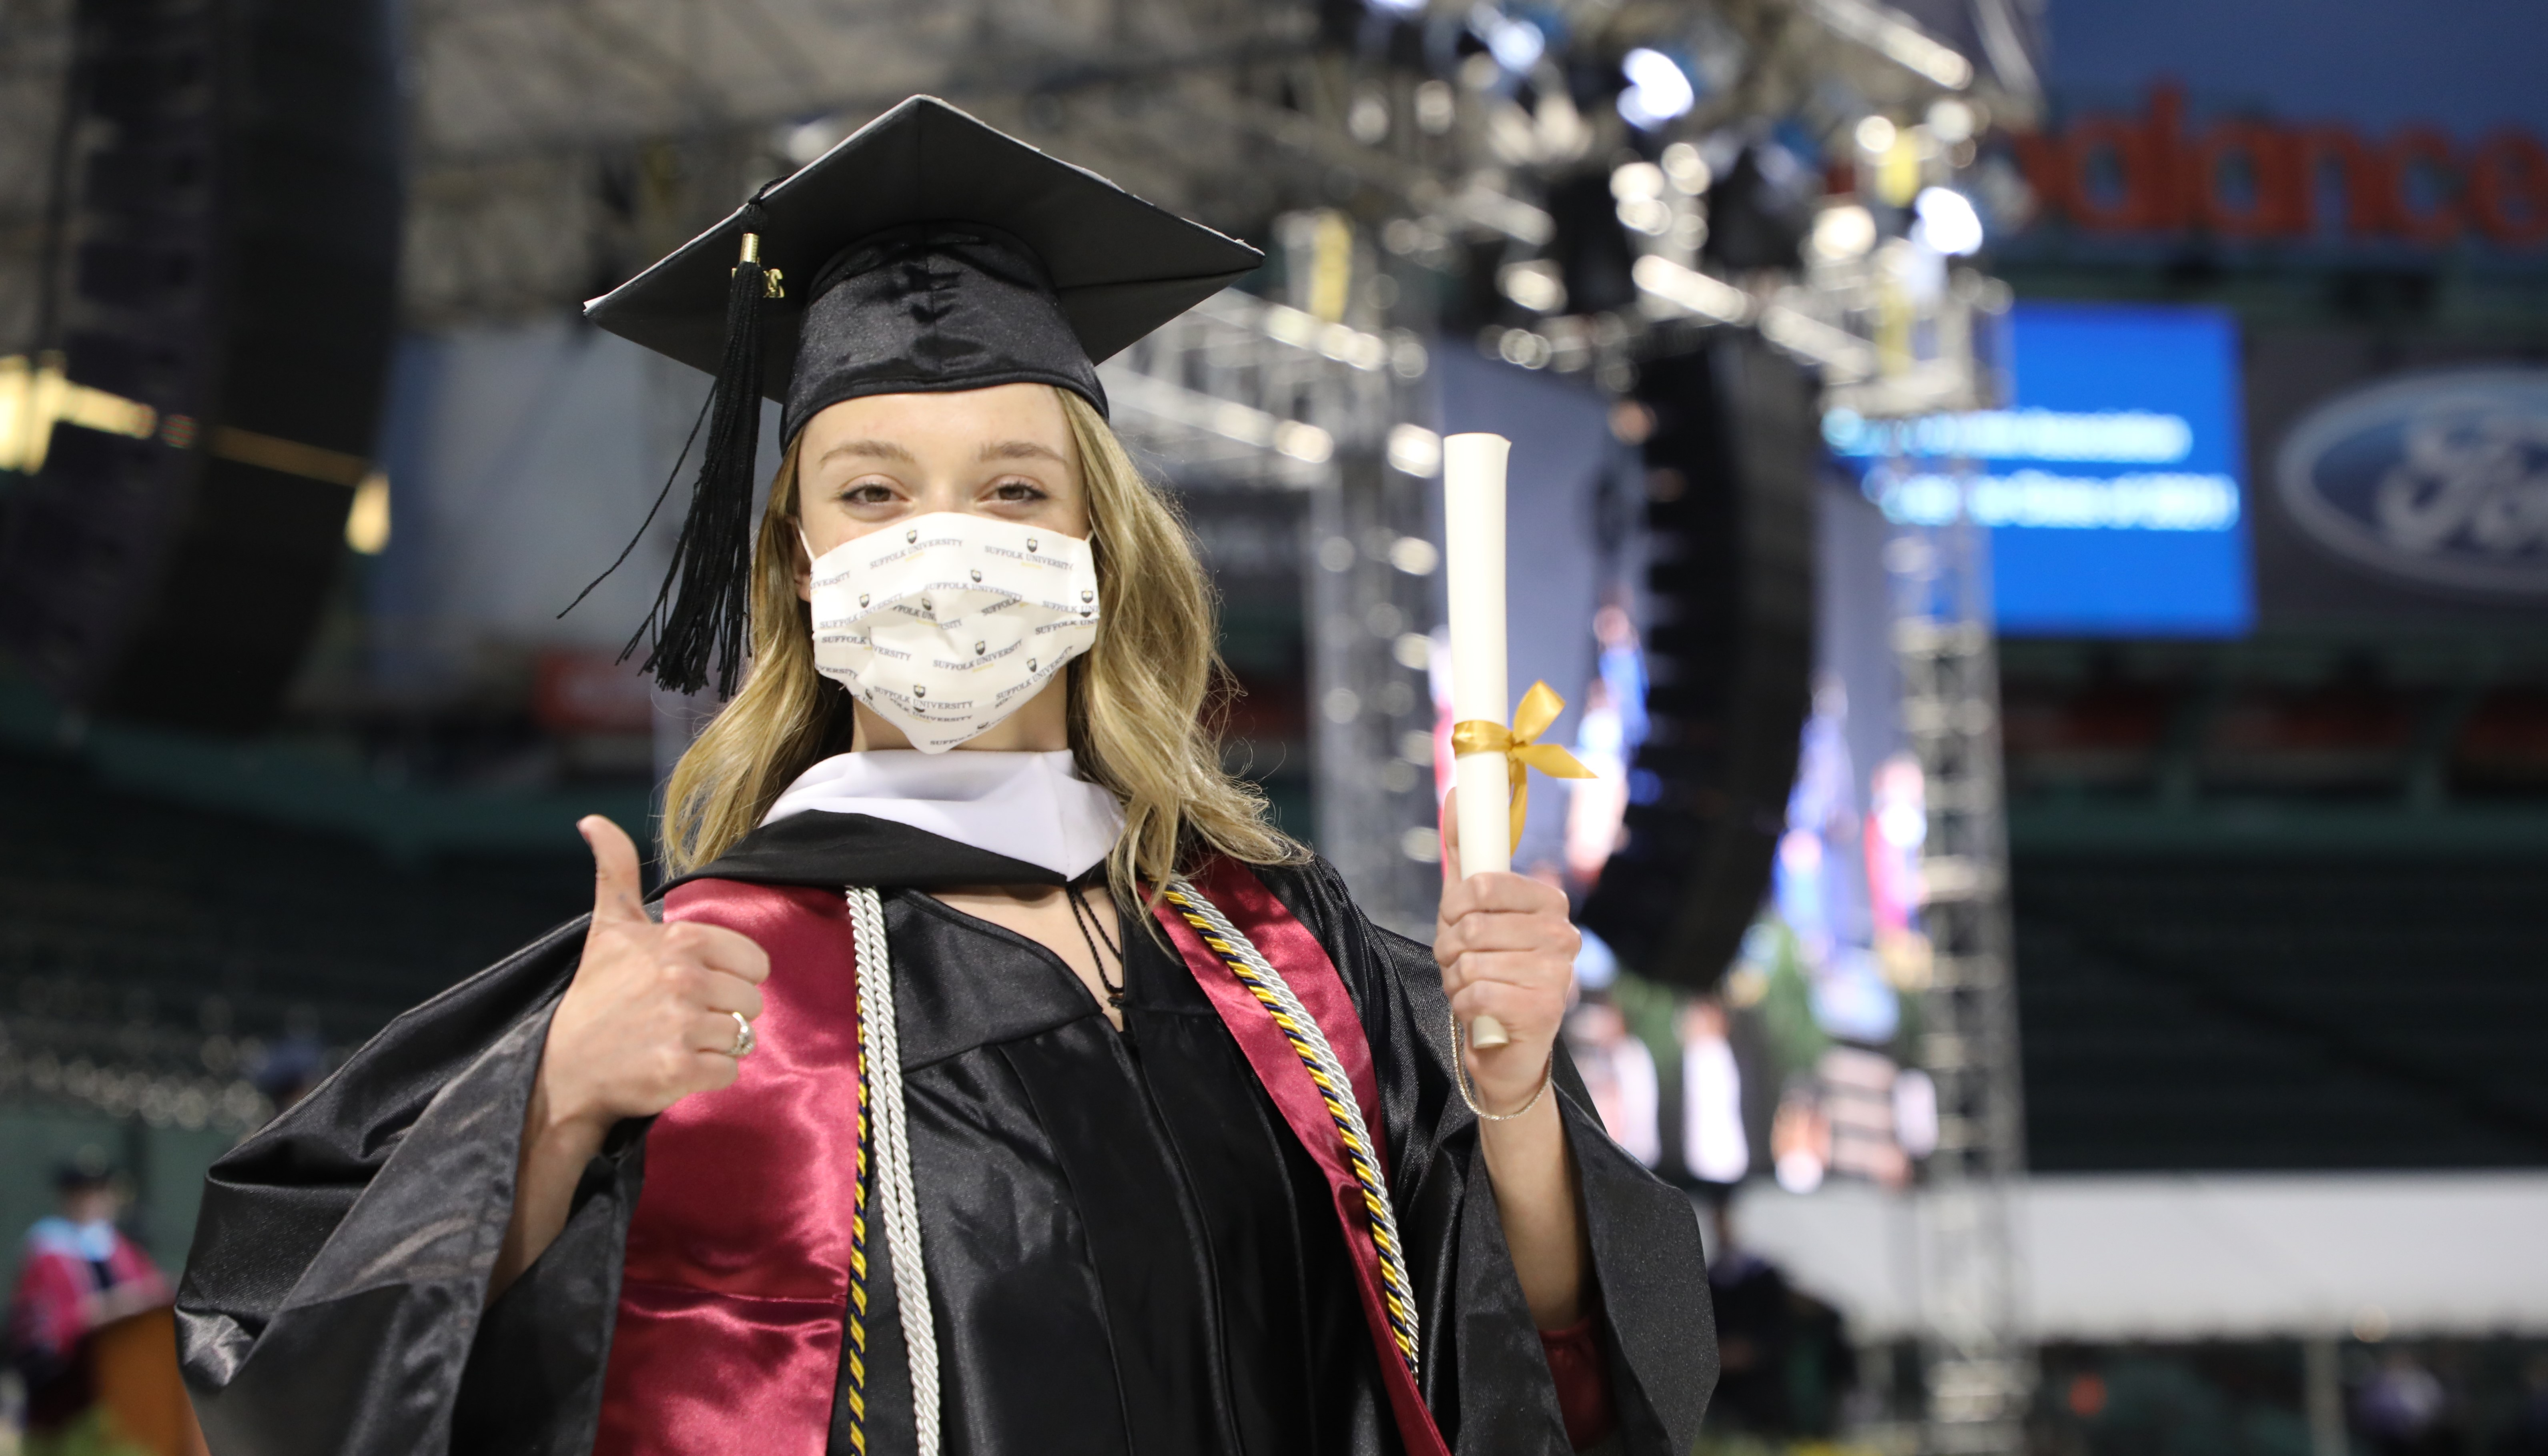 Student in a cap, gown, and mark gives a "thumbs up" sign as she holds her degree